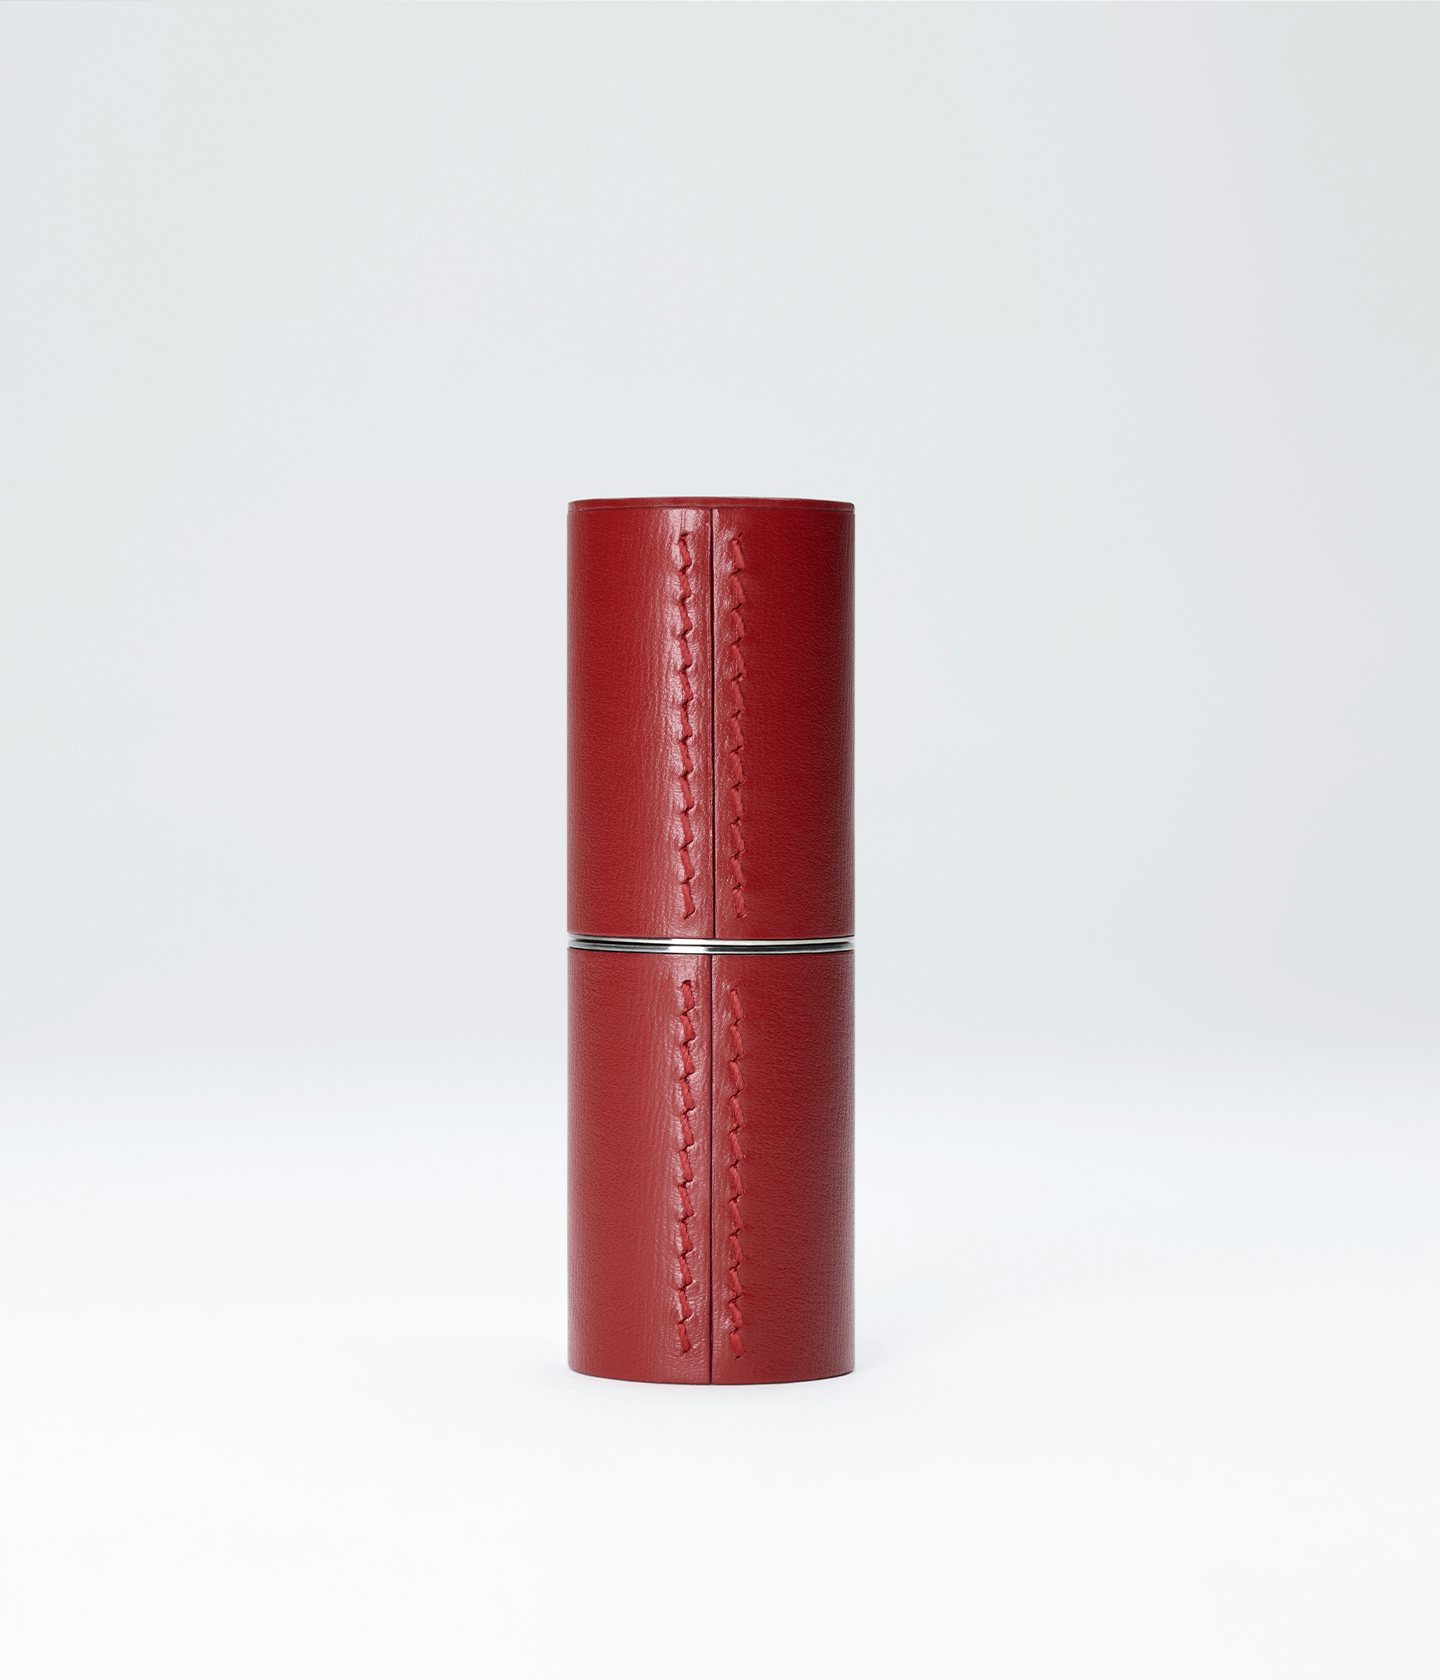 La bouche rouge The Iconic Rouge Montaigne in the red leather case